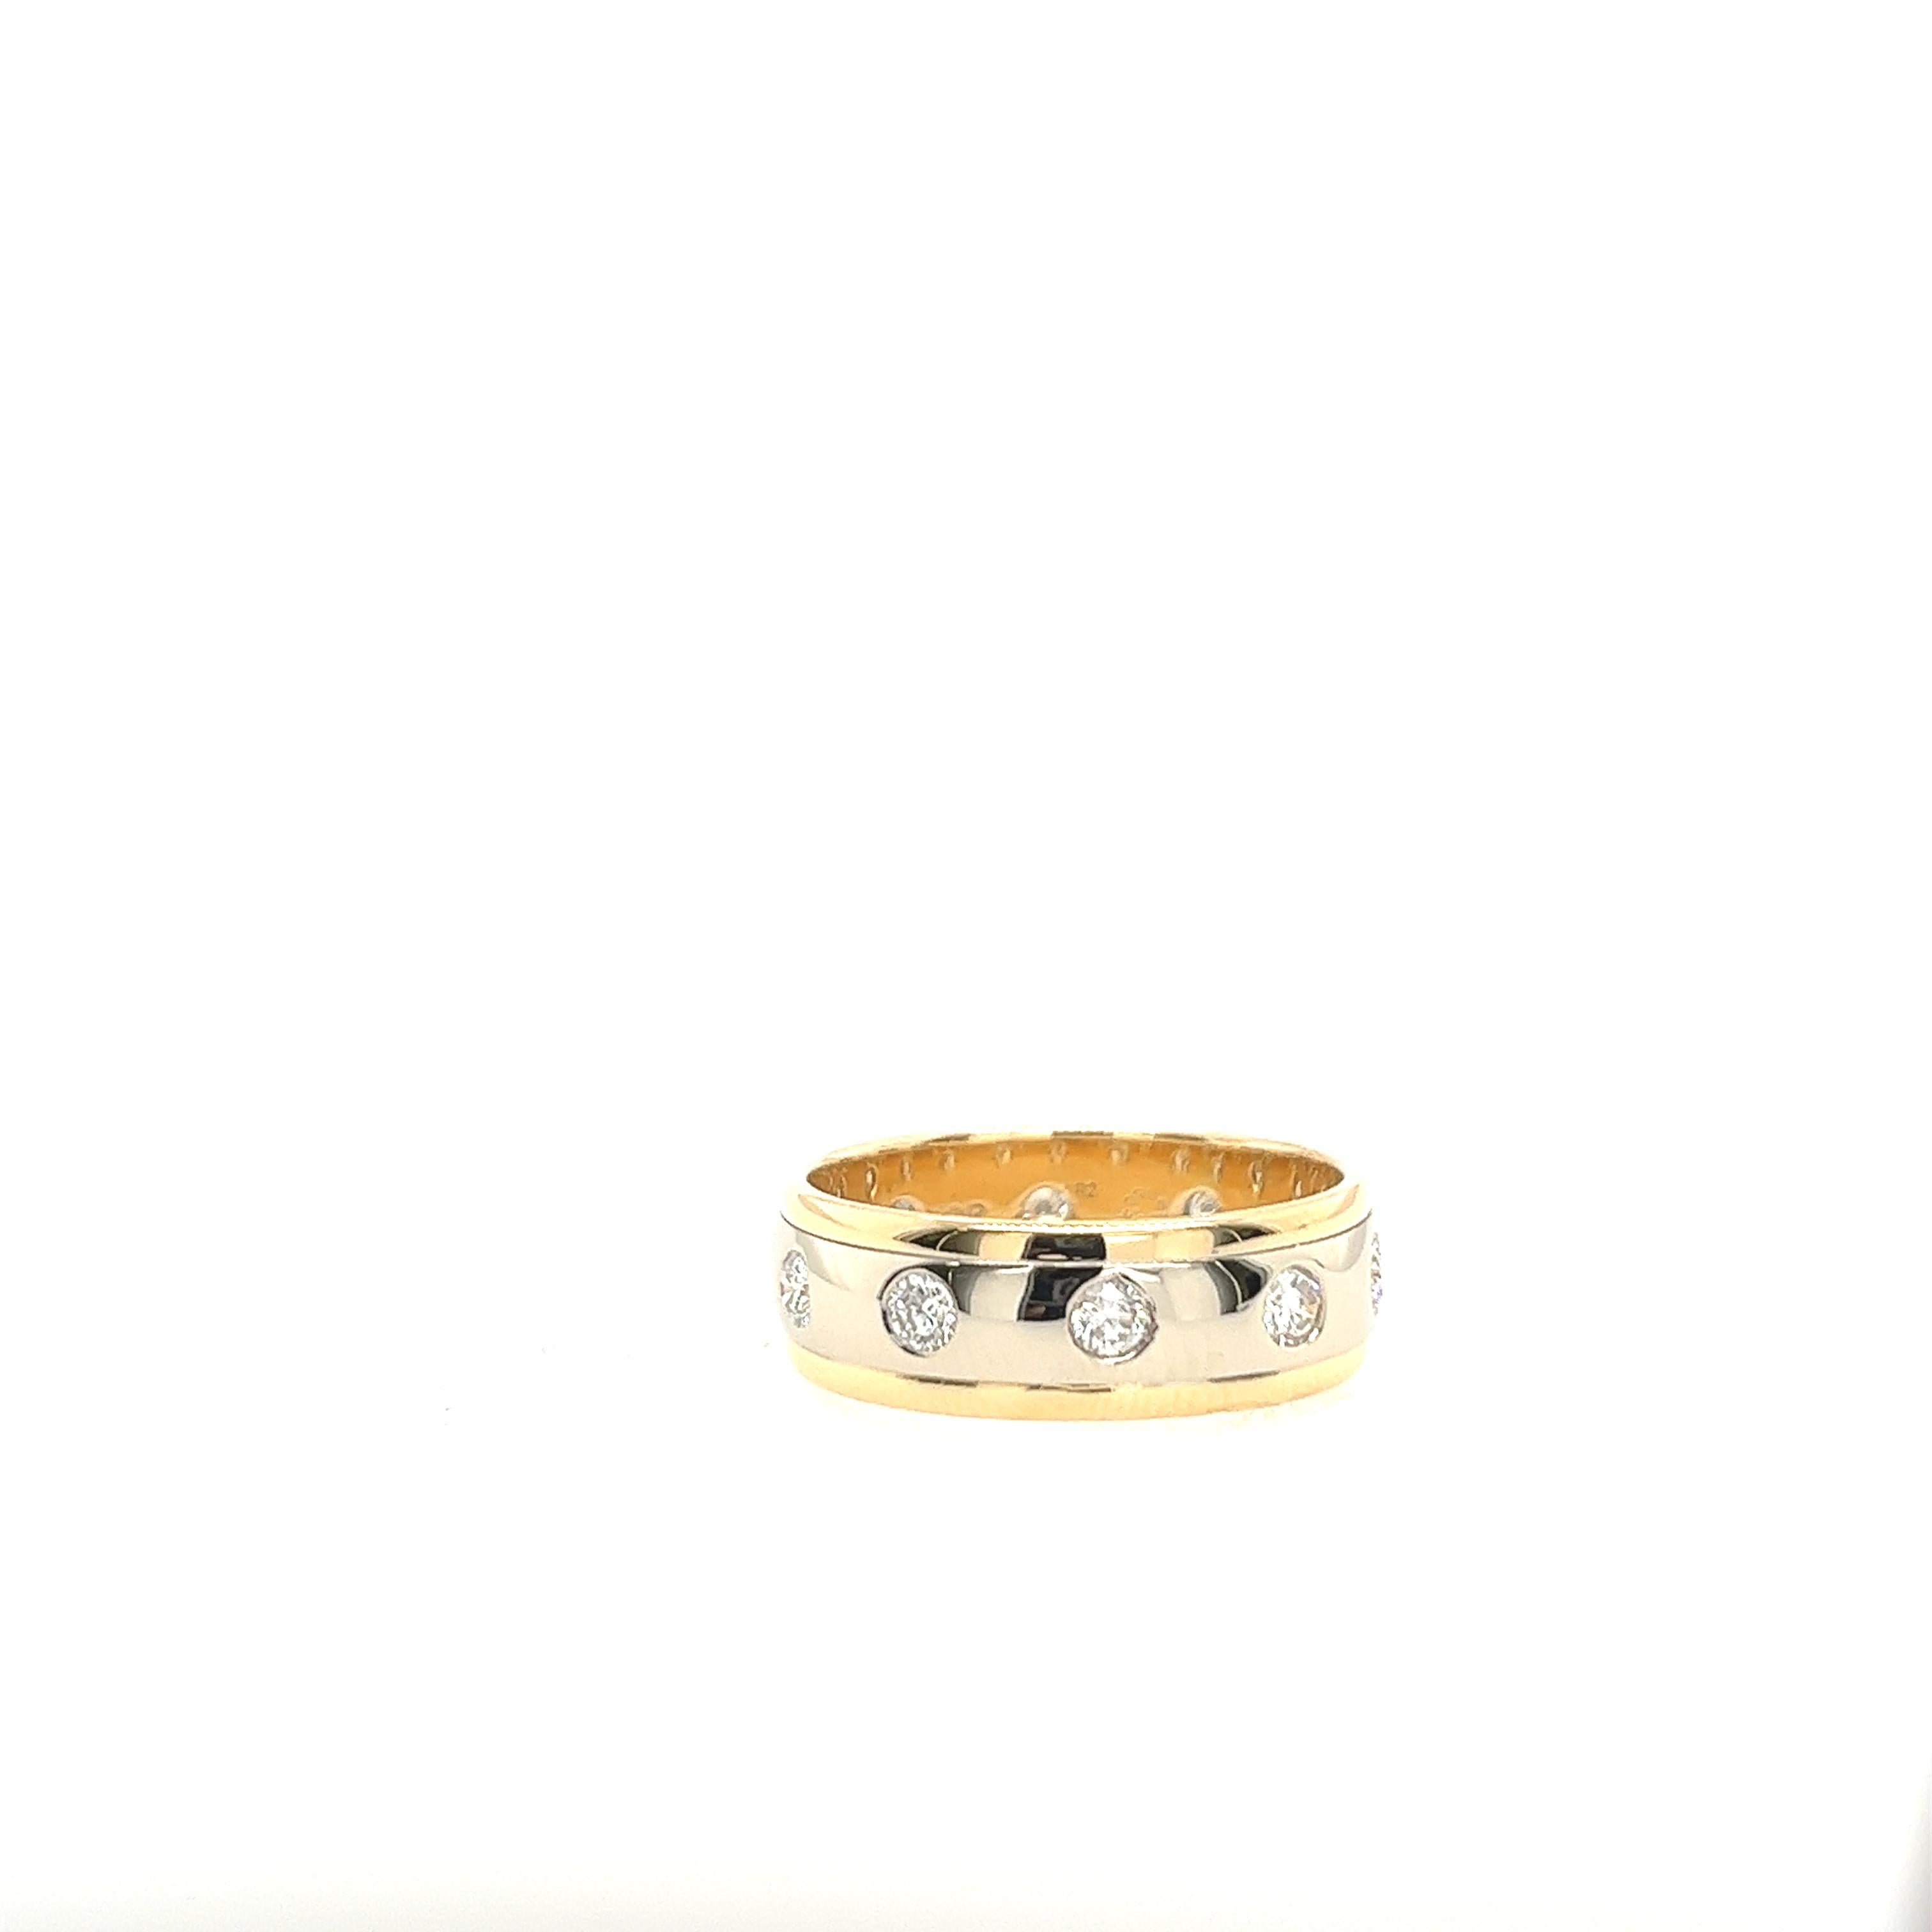 Round Cut 18ct Yellow & White Gold Diamond Band Ring Set With 10 Round Diamonds For Sale